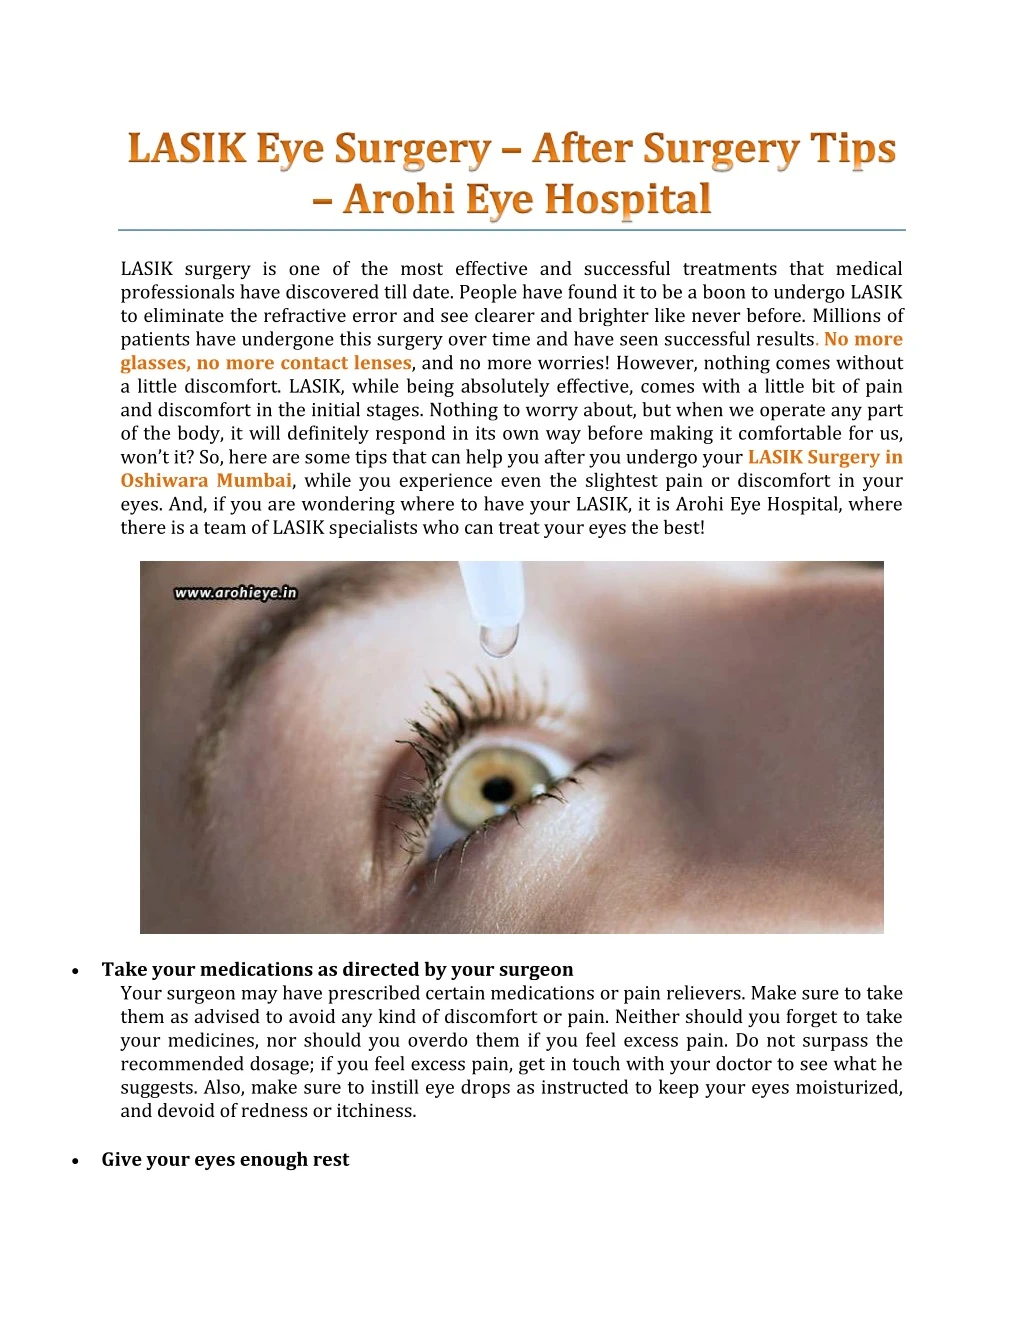 lasik surgery is one of the most effective